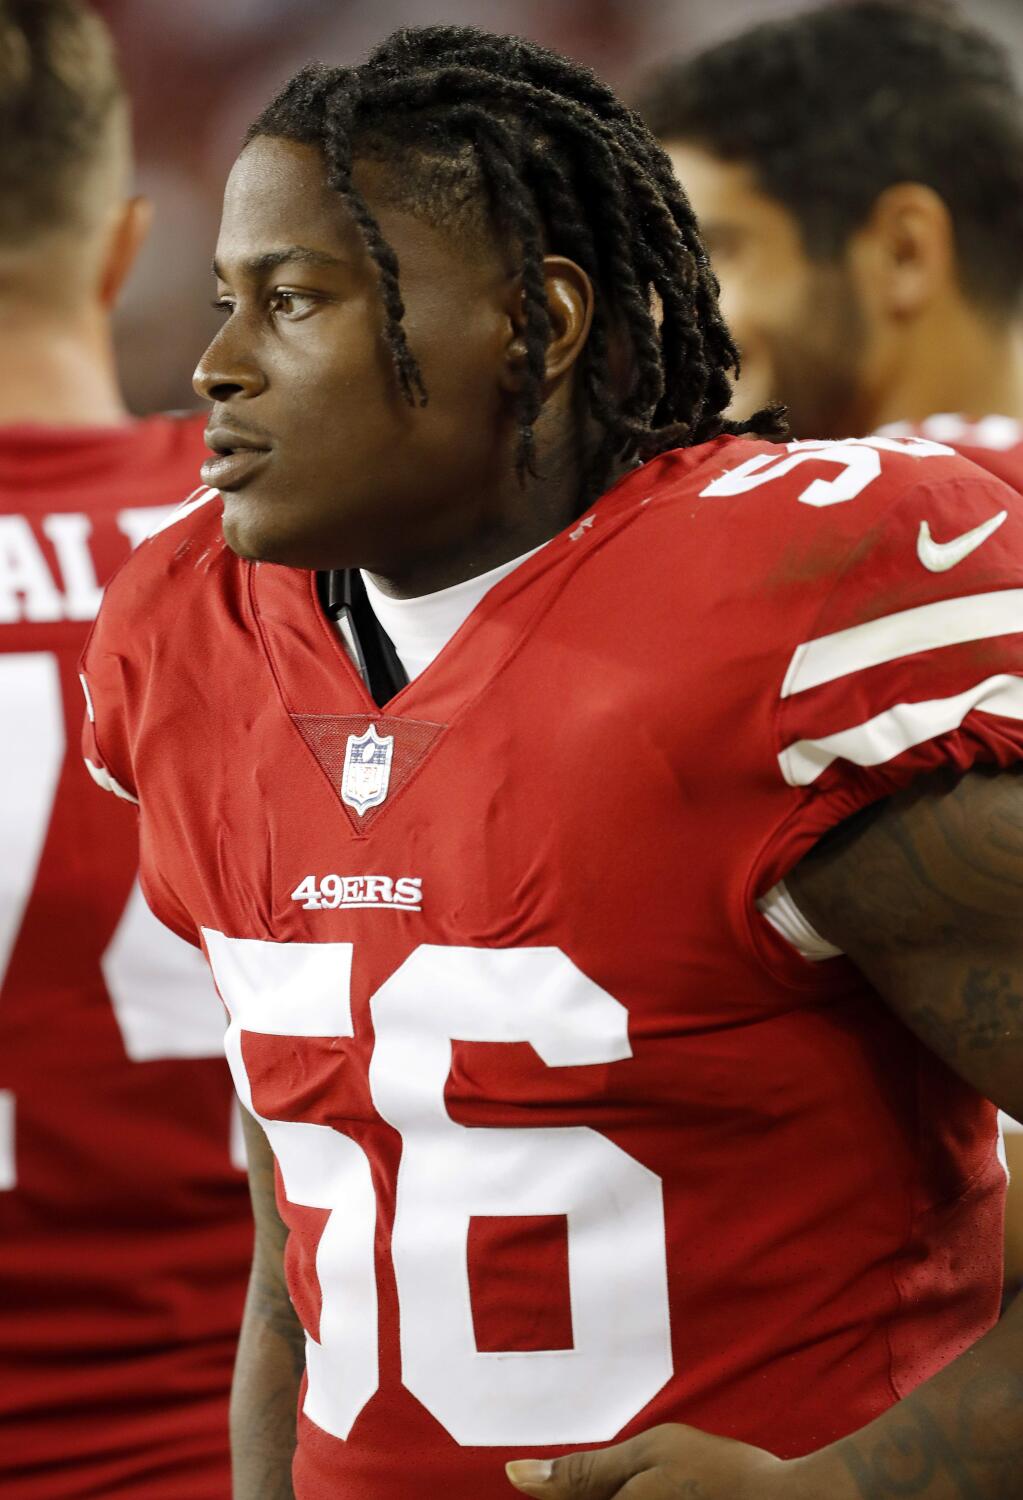 San Francisco 49ers linebacker Reuben Foster watches from the sideline during the second half of an NFL preseason football game against the Dallas Cowboys in Santa Clara, Calif., Thursday, Aug. 9, 2018. (AP Photo/Josie Lepe)